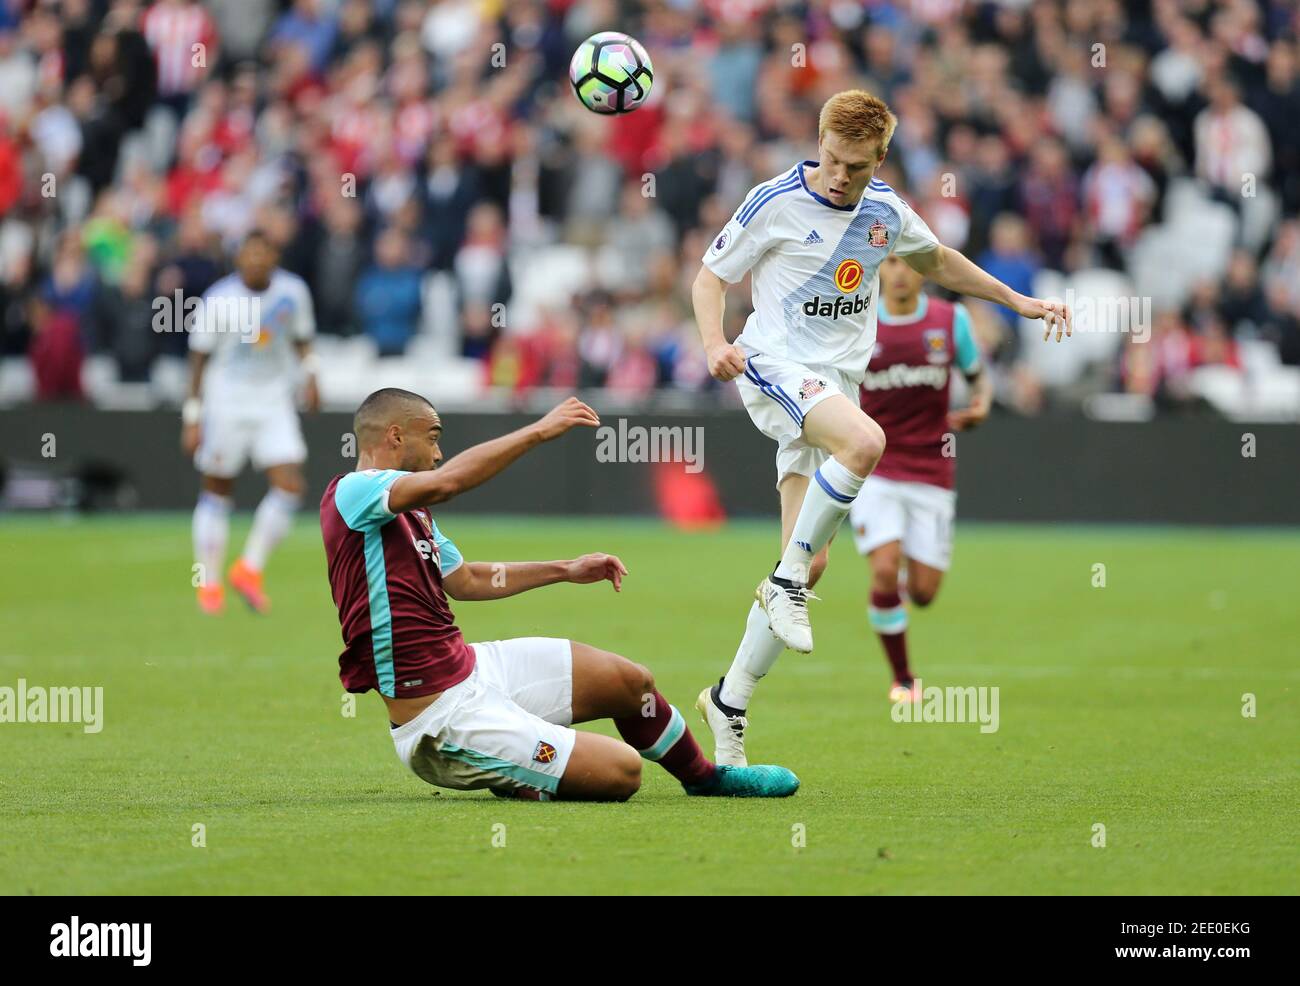 Britain Soccer Football - West Ham United v Sunderland - Premier League - London Stadium - 22/10/16 Sunderland's Duncan Watmore in action with West Ham United's Winston Reid Reuters / Paul Hackett Livepic EDITORIAL USE ONLY. No use with unauthorized audio, video, data, fixture lists, club/league logos or 'live' services. Online in-match use limited to 45 images, no video emulation. No use in betting, games or single club/league/player publications.  Please contact your account representative for further details. Stock Photo